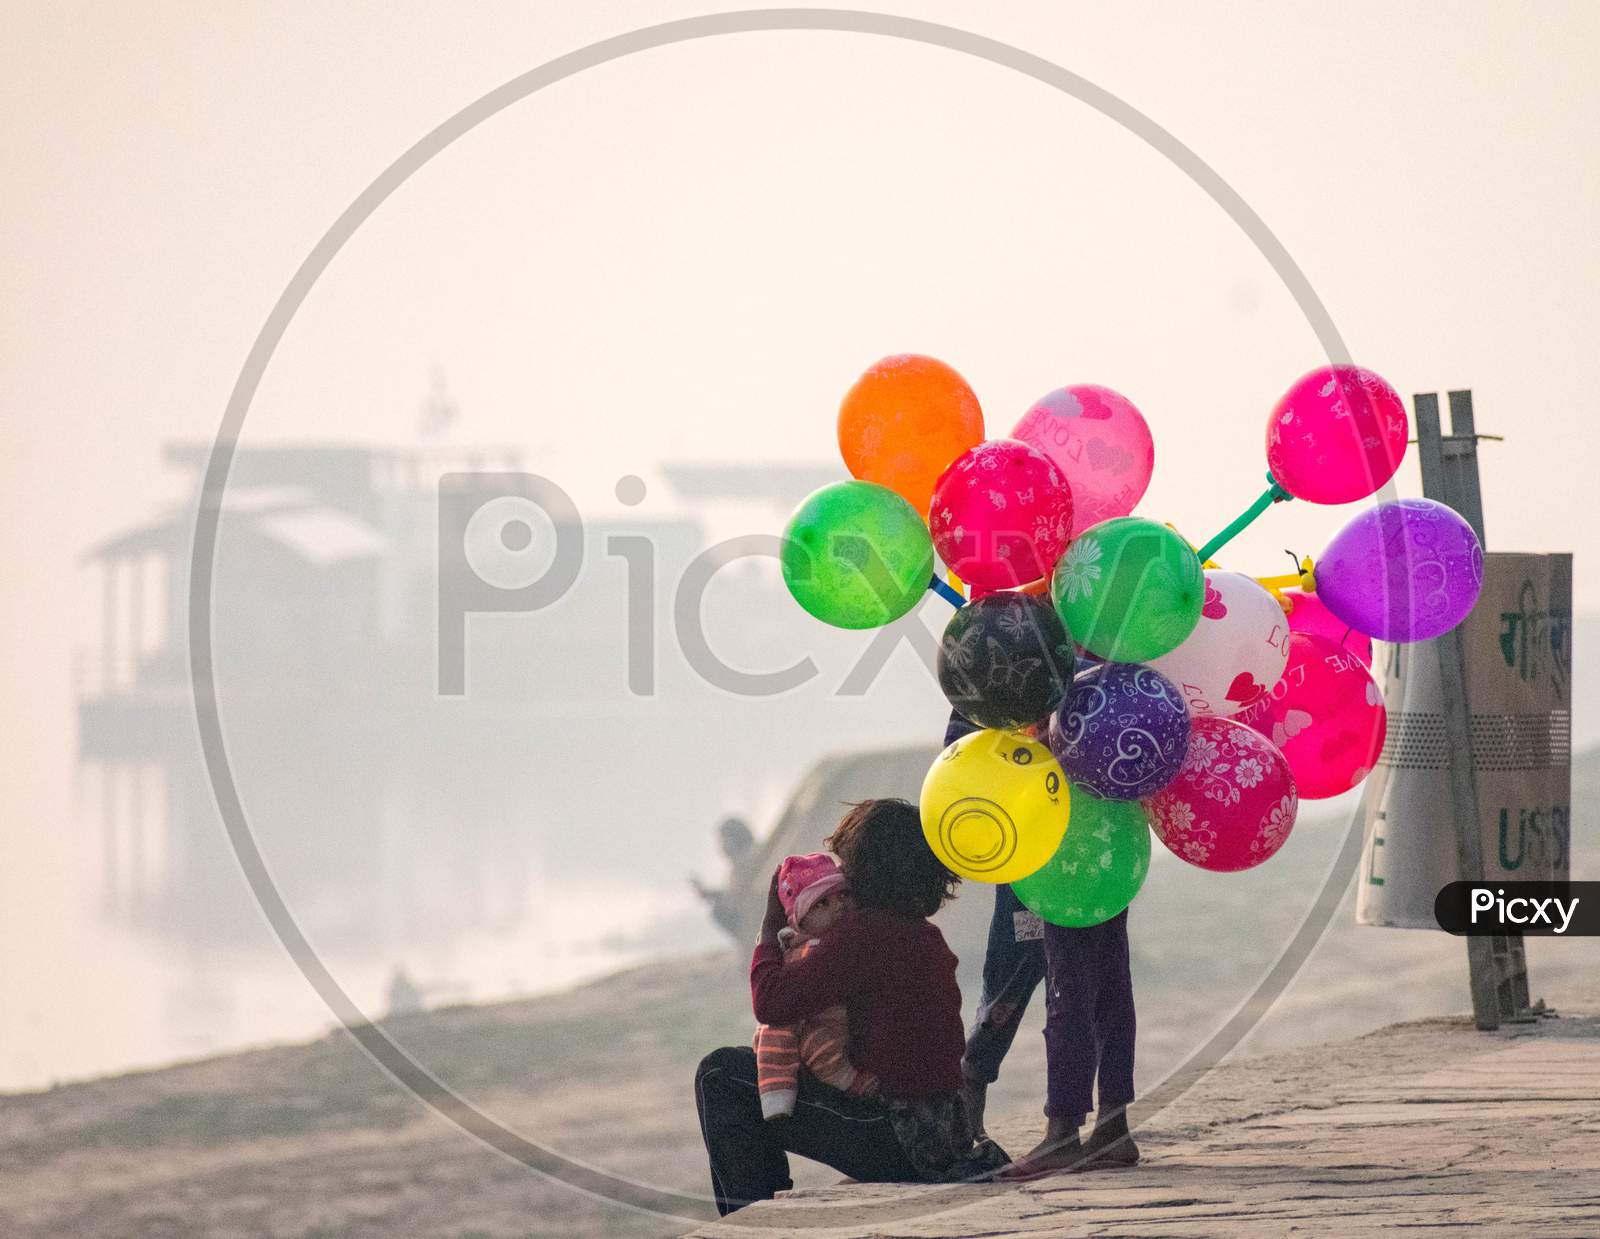 Chid selling Balloon